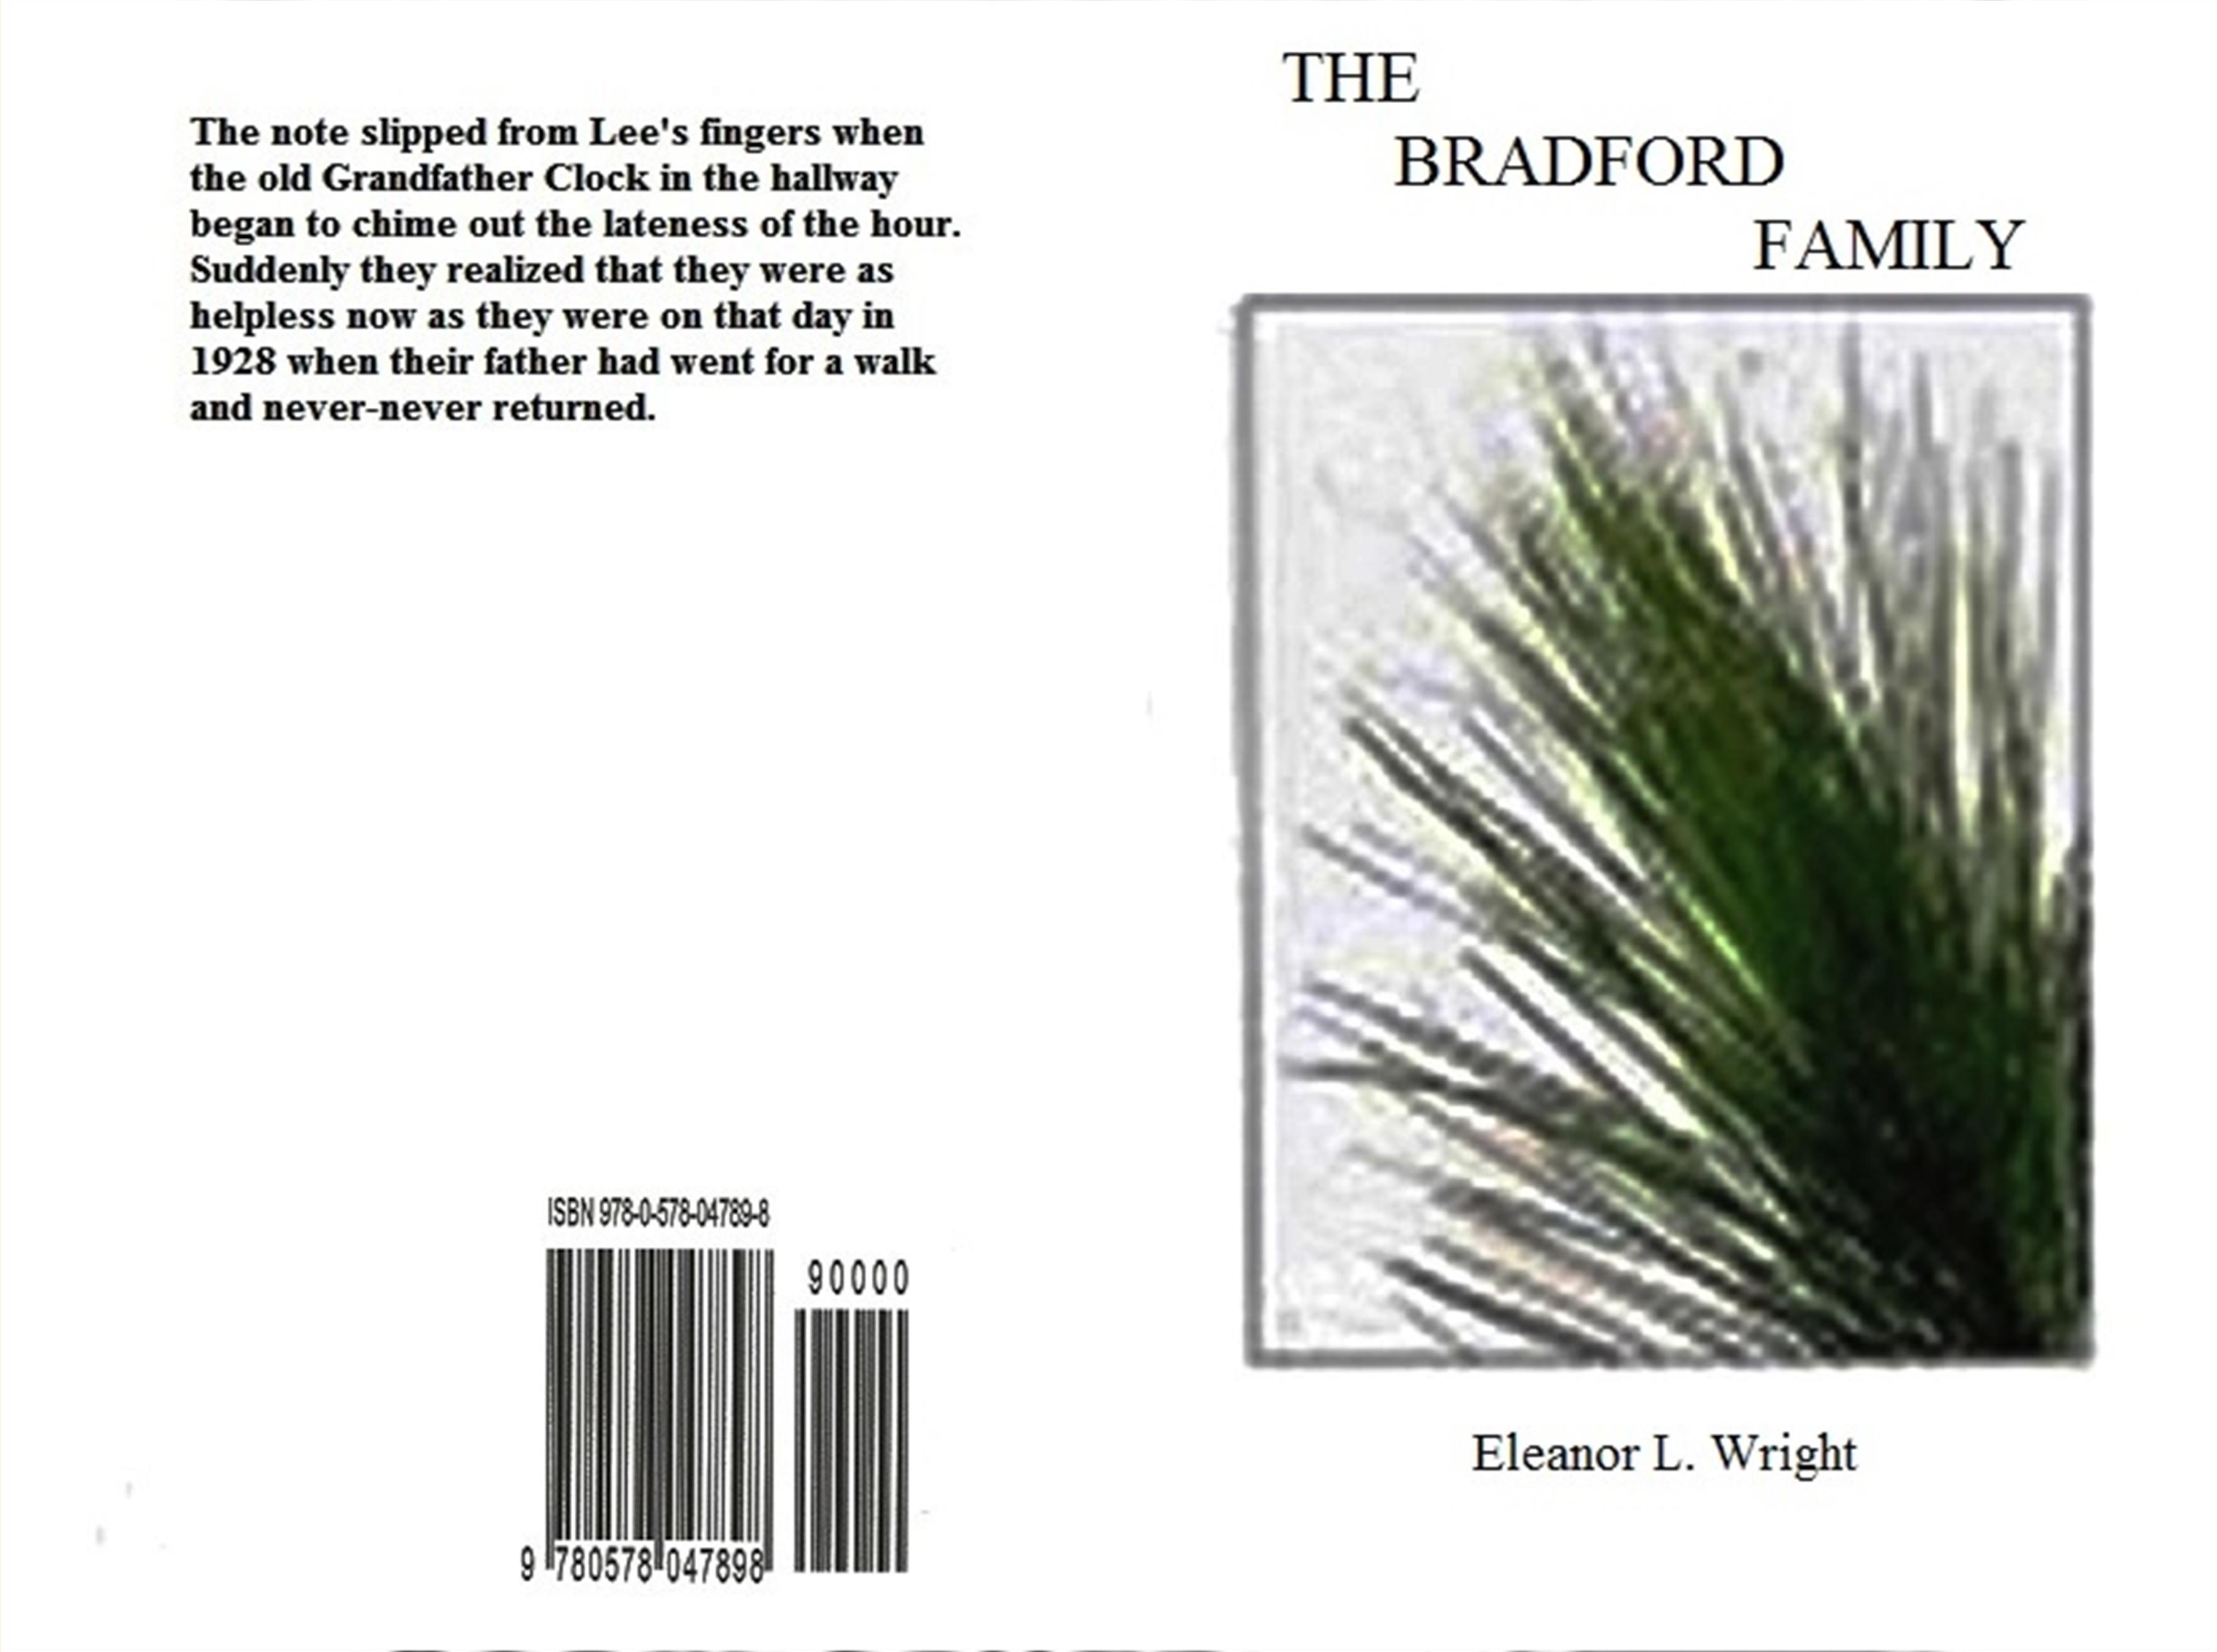 The Bradford Family cover image